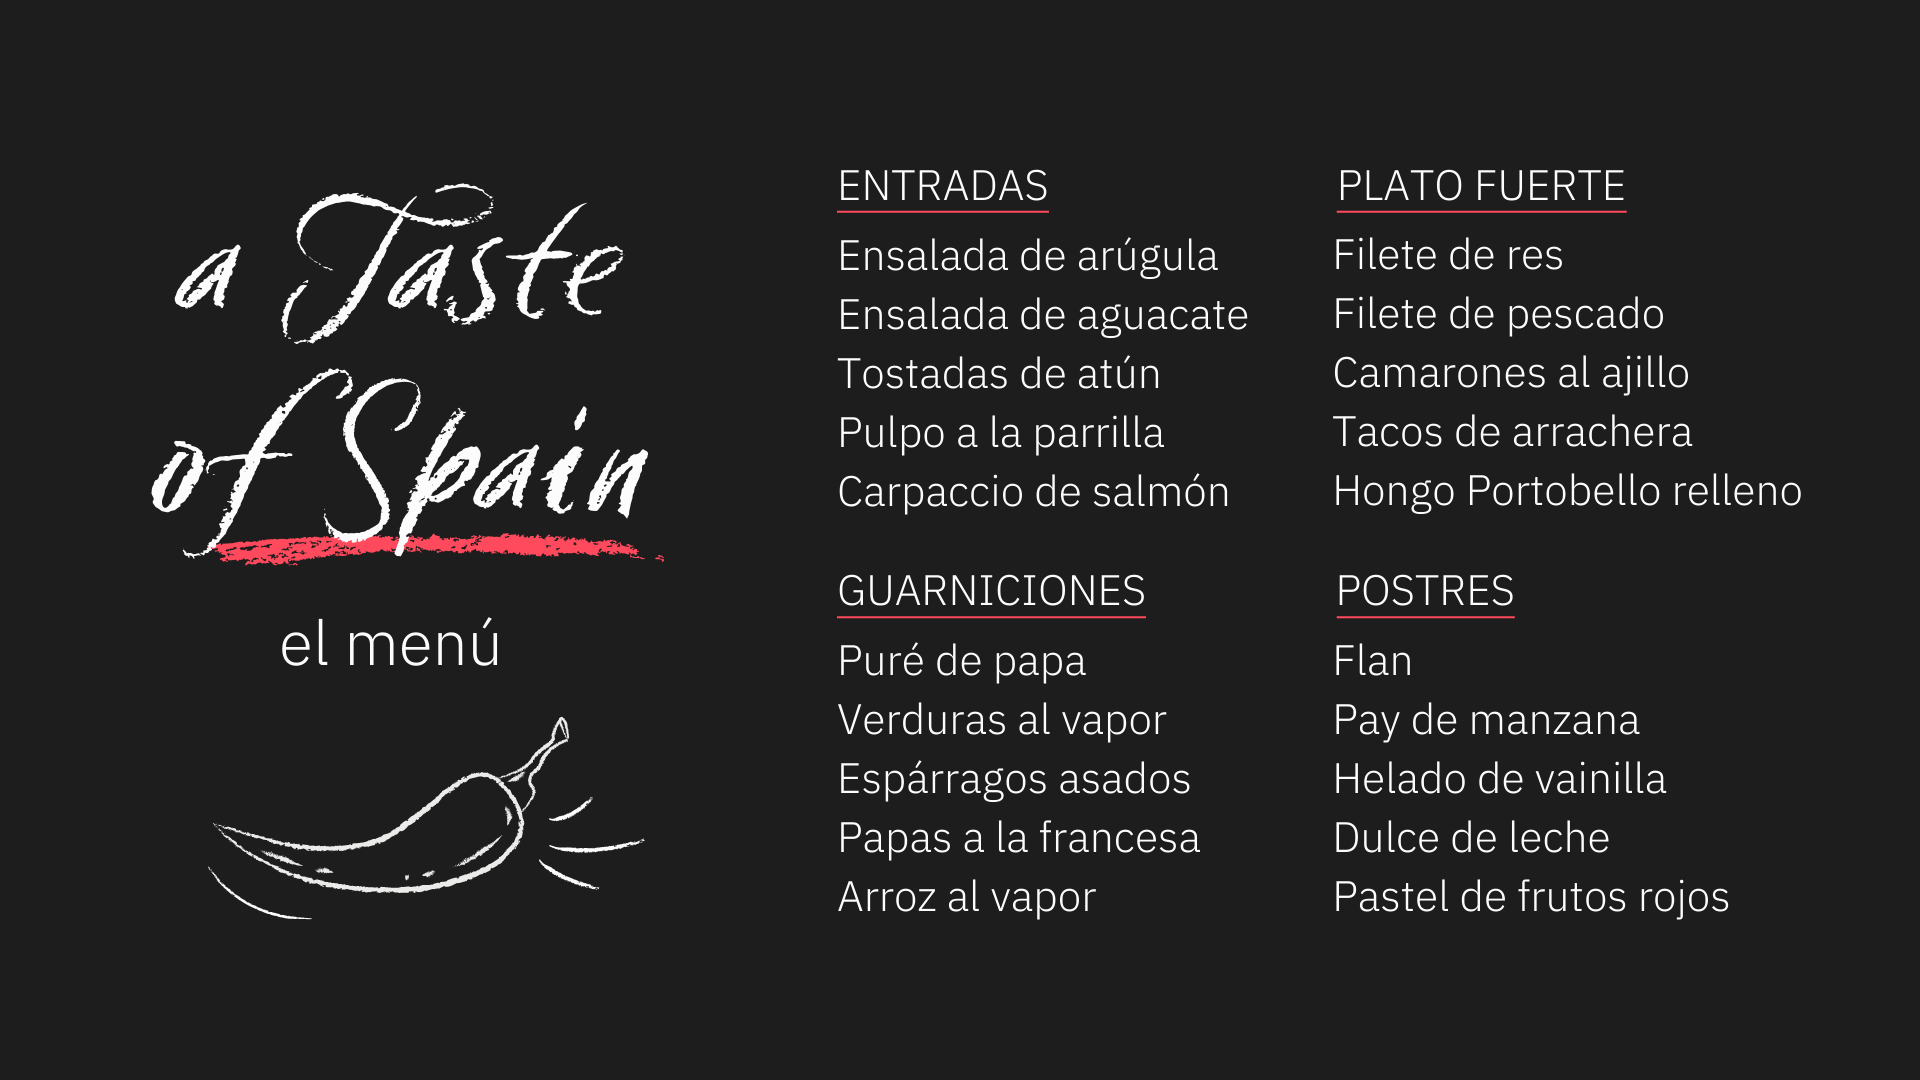 How to order food in Spanish with our Berlitz Spanish menu.